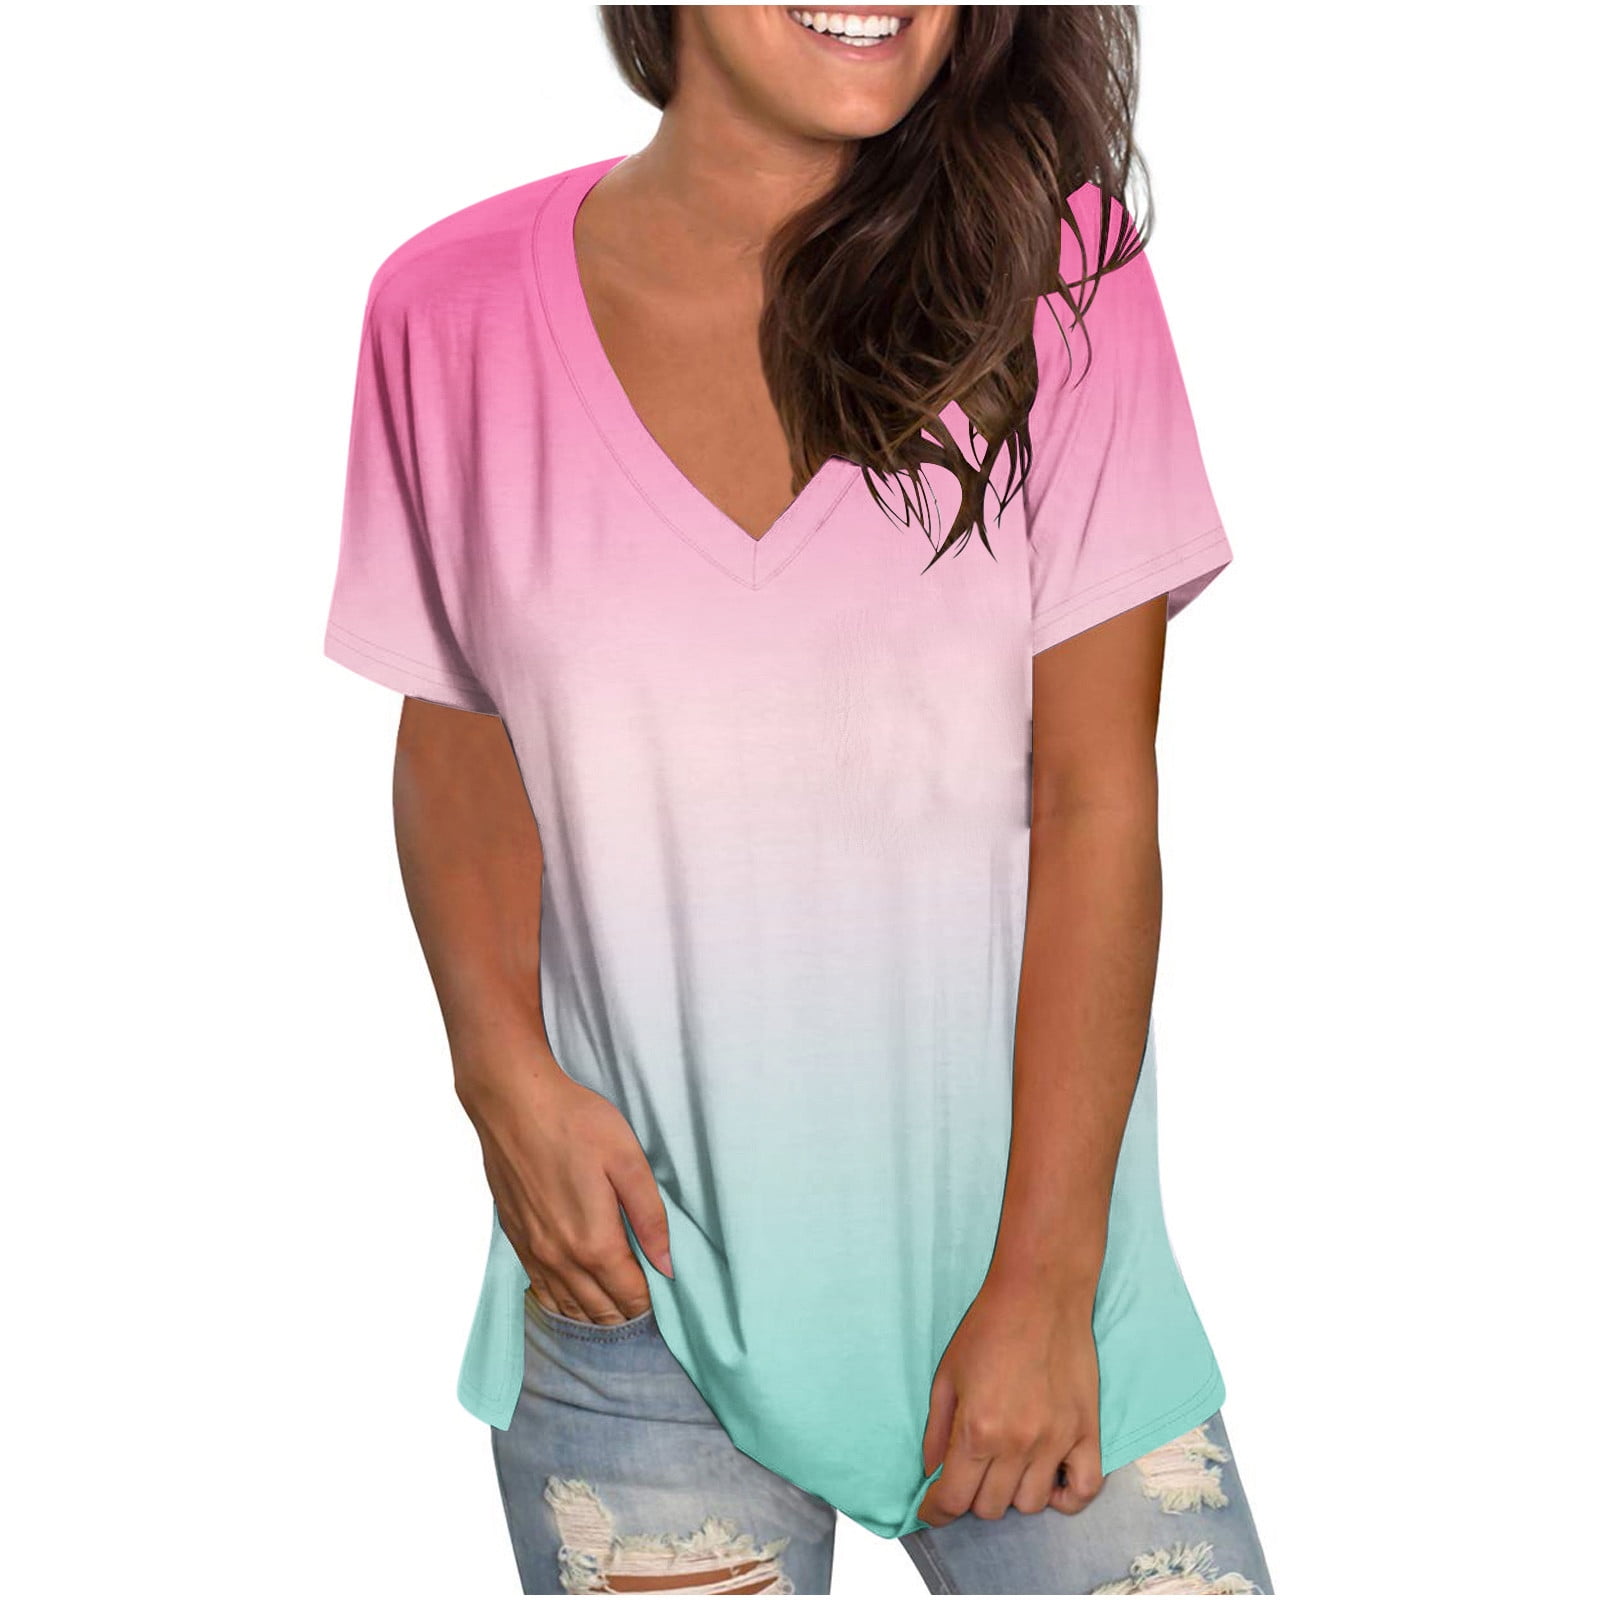 Women Casual Gradient Print T Shirt Short Sleeve Shirt Loose,Online  Shopping Prime,Clearance Clothes for Women,4 Dollar Items,Prime Deals Today  2022